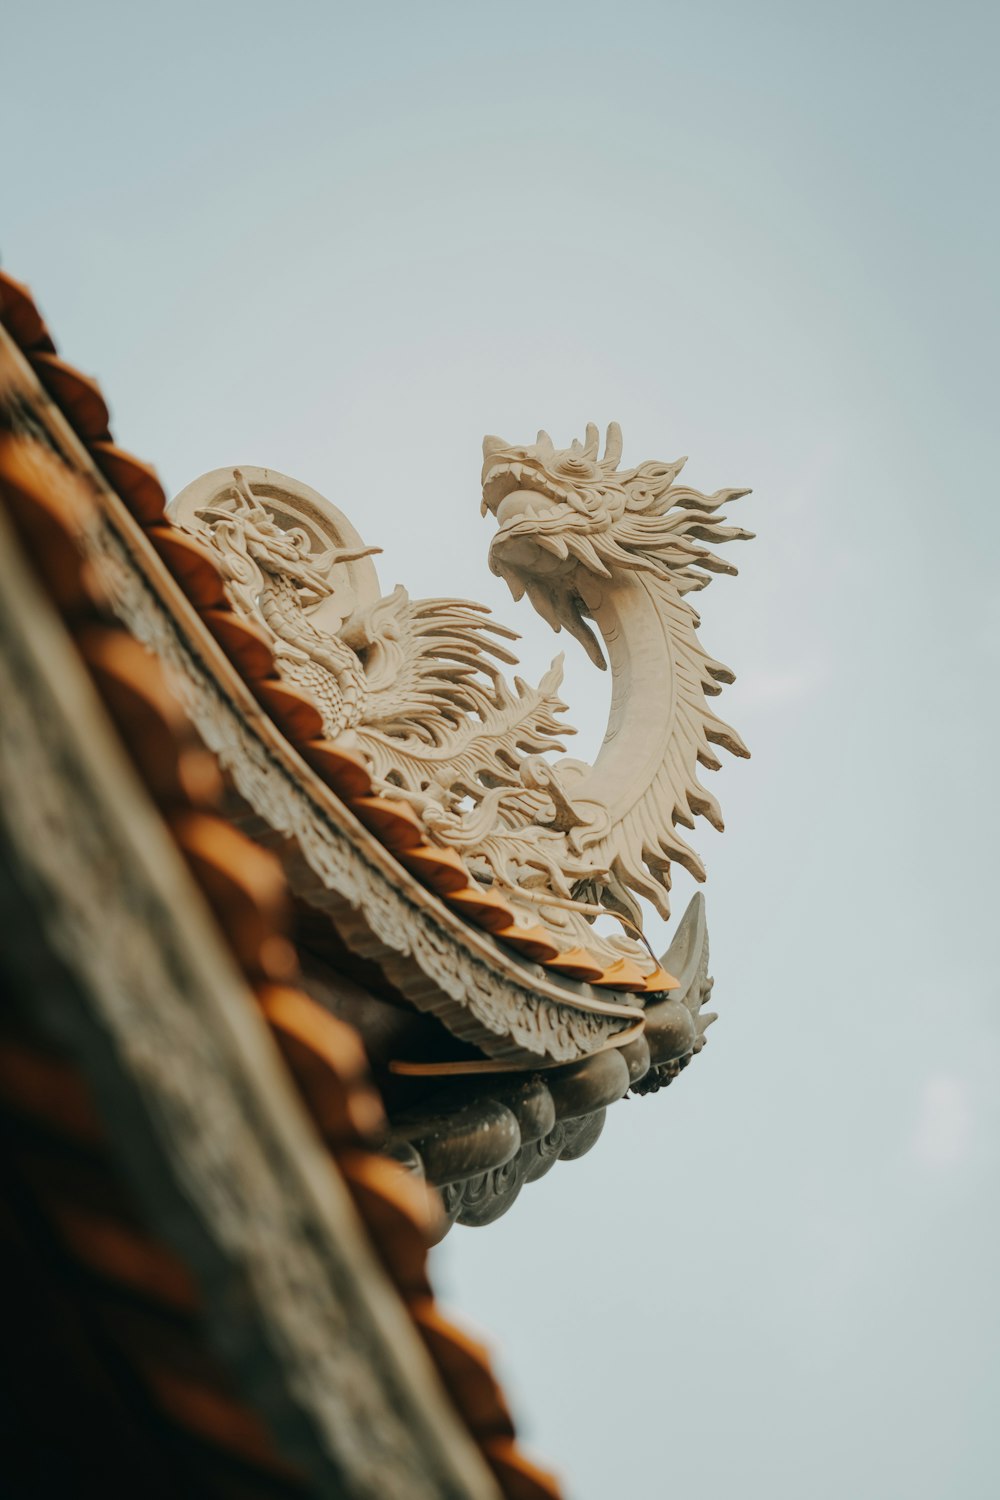 a close up of a roof with a dragon decoration on it